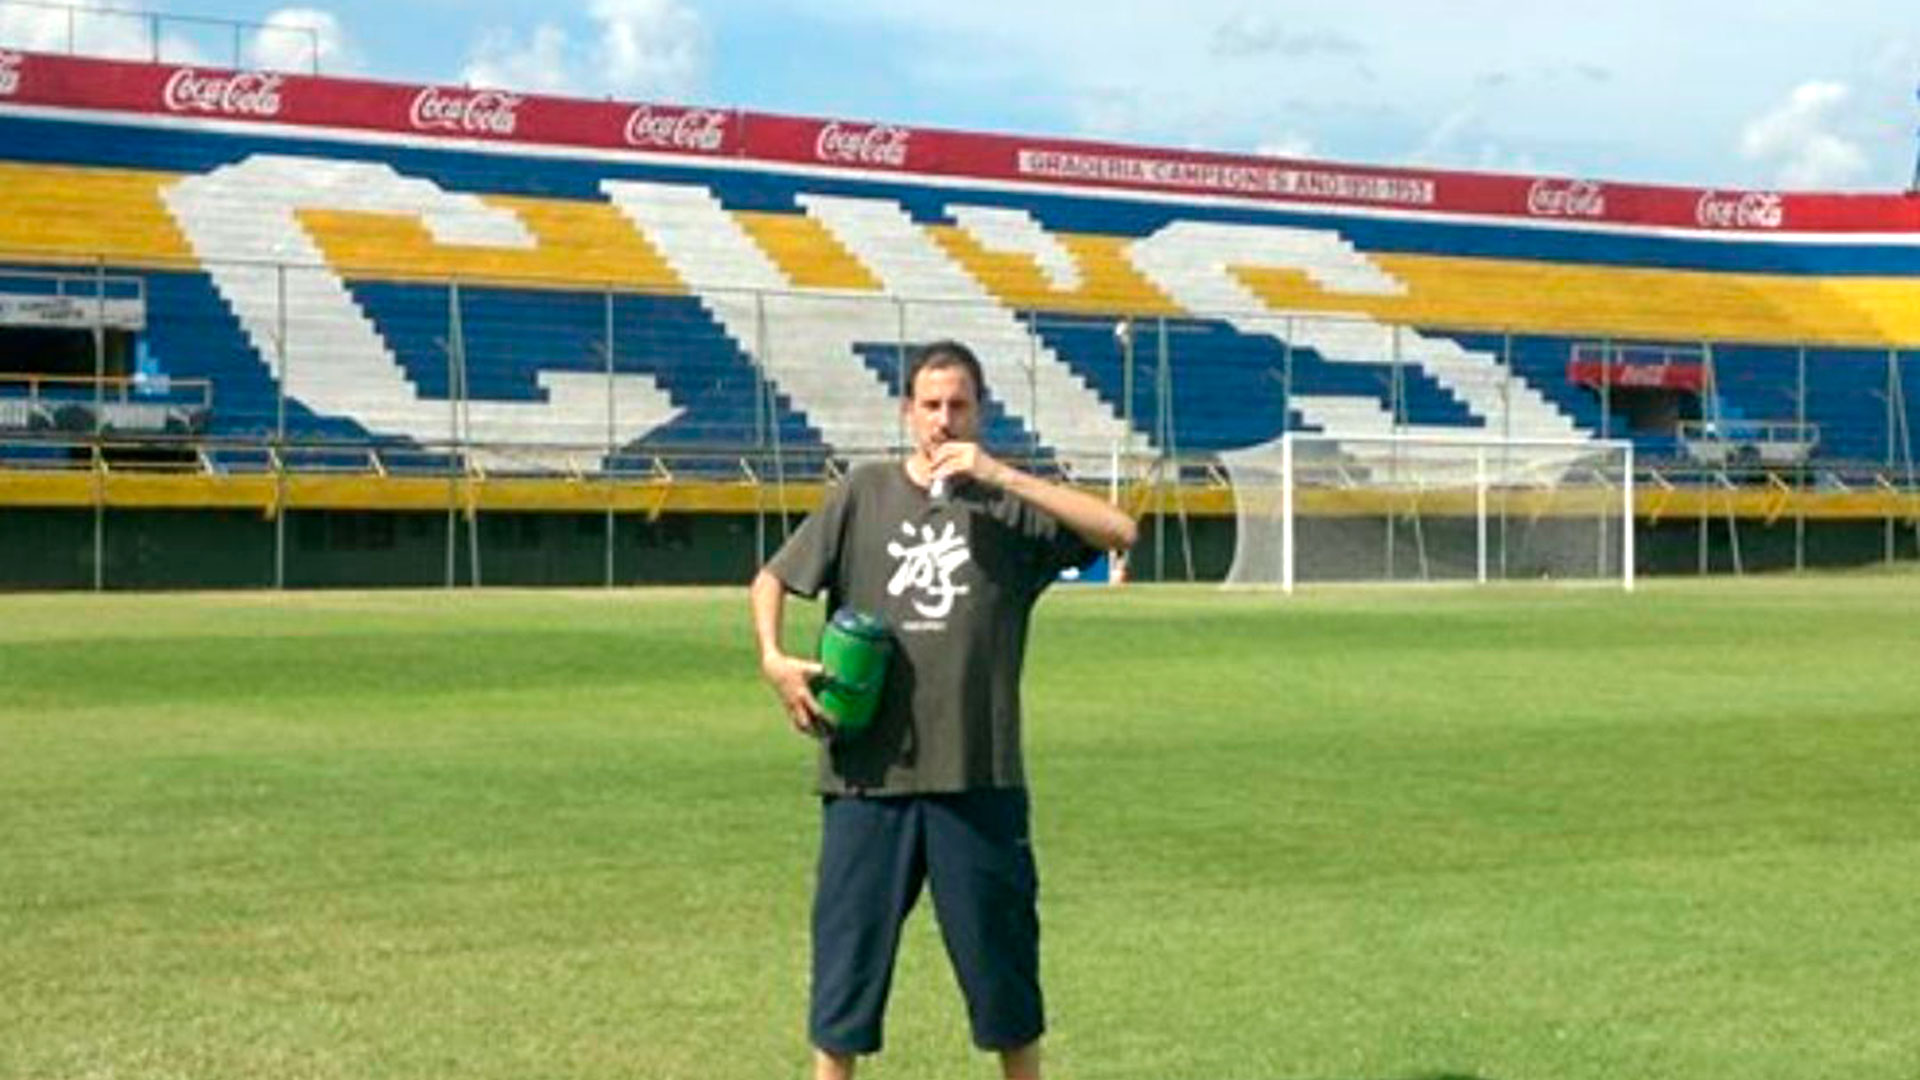 The author drinking tereré on the field of Sportivo Luqueño, Paraguay